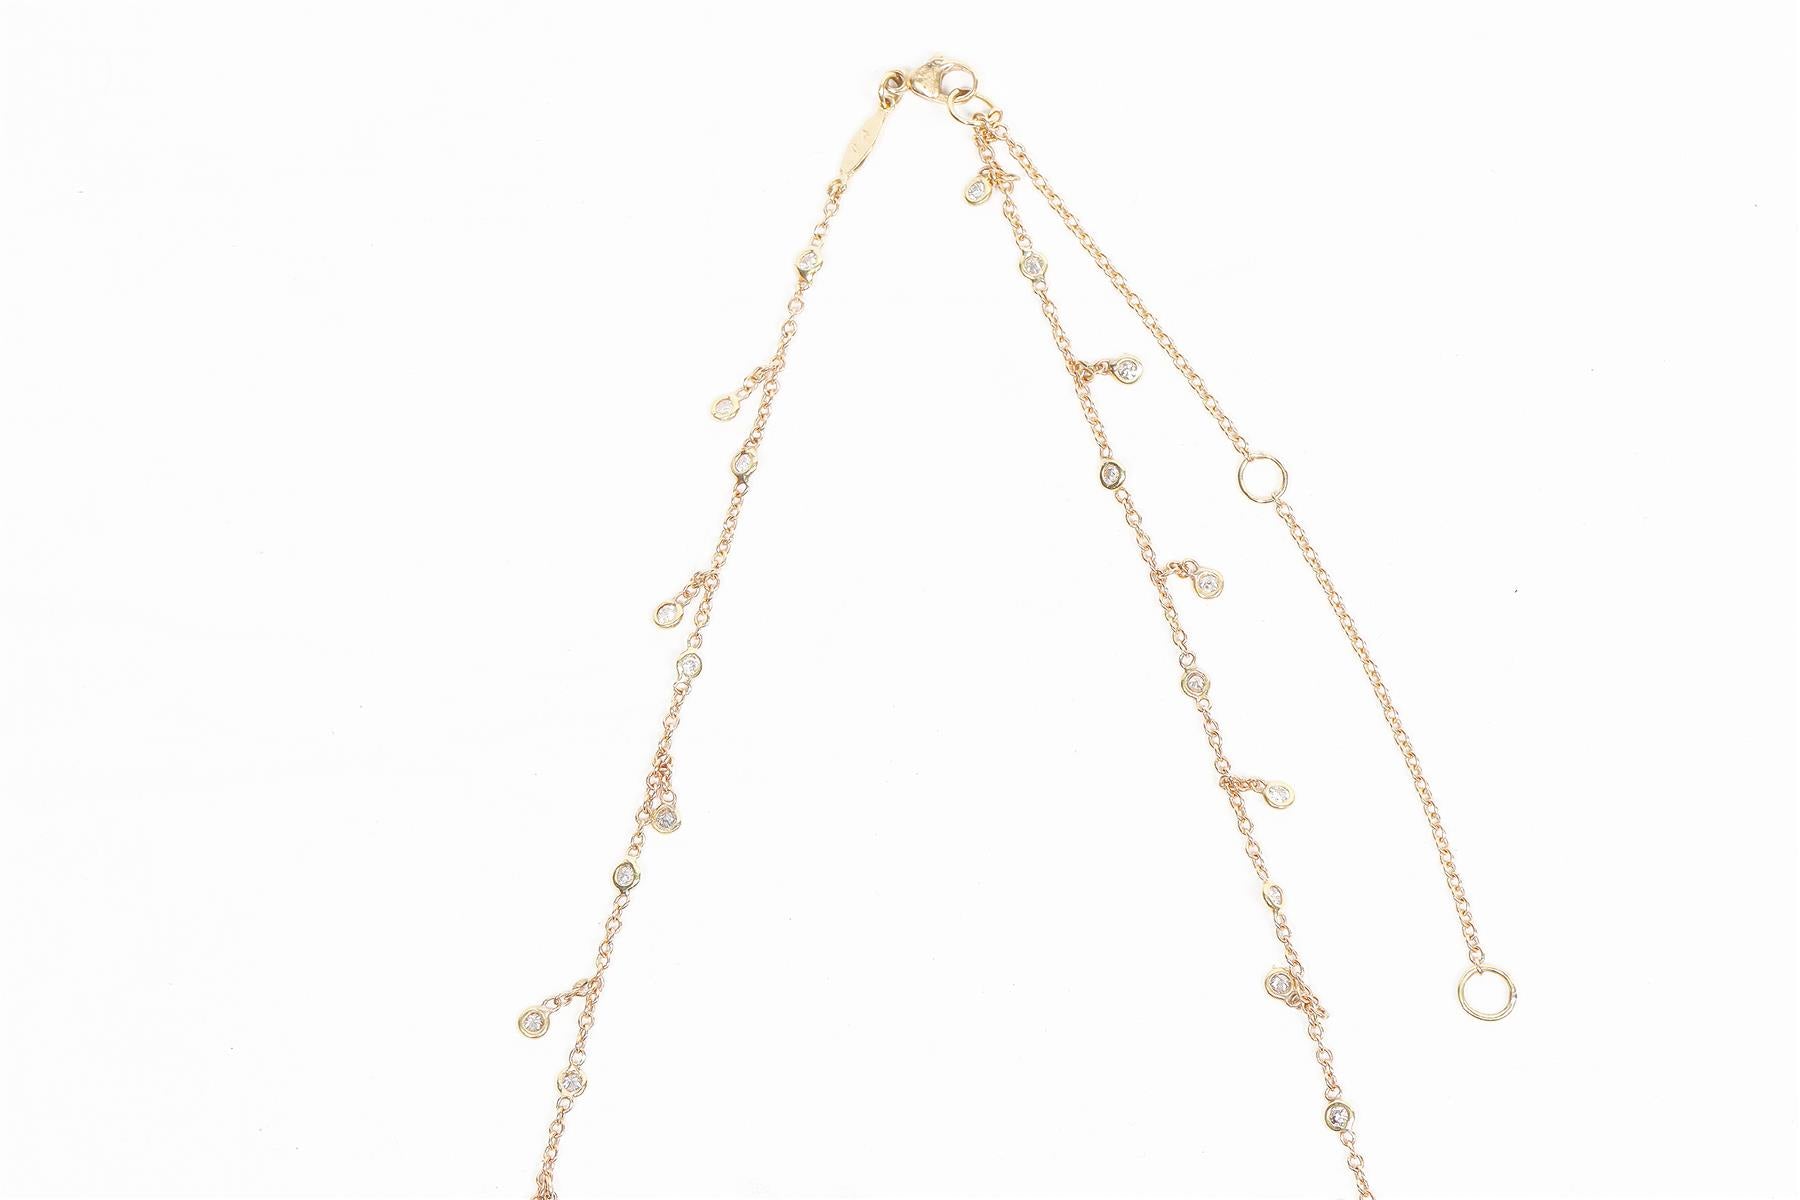 JACQUIE AICHE YELLOW GOLD AND PAVE DIAMOND BELLY CHAIN